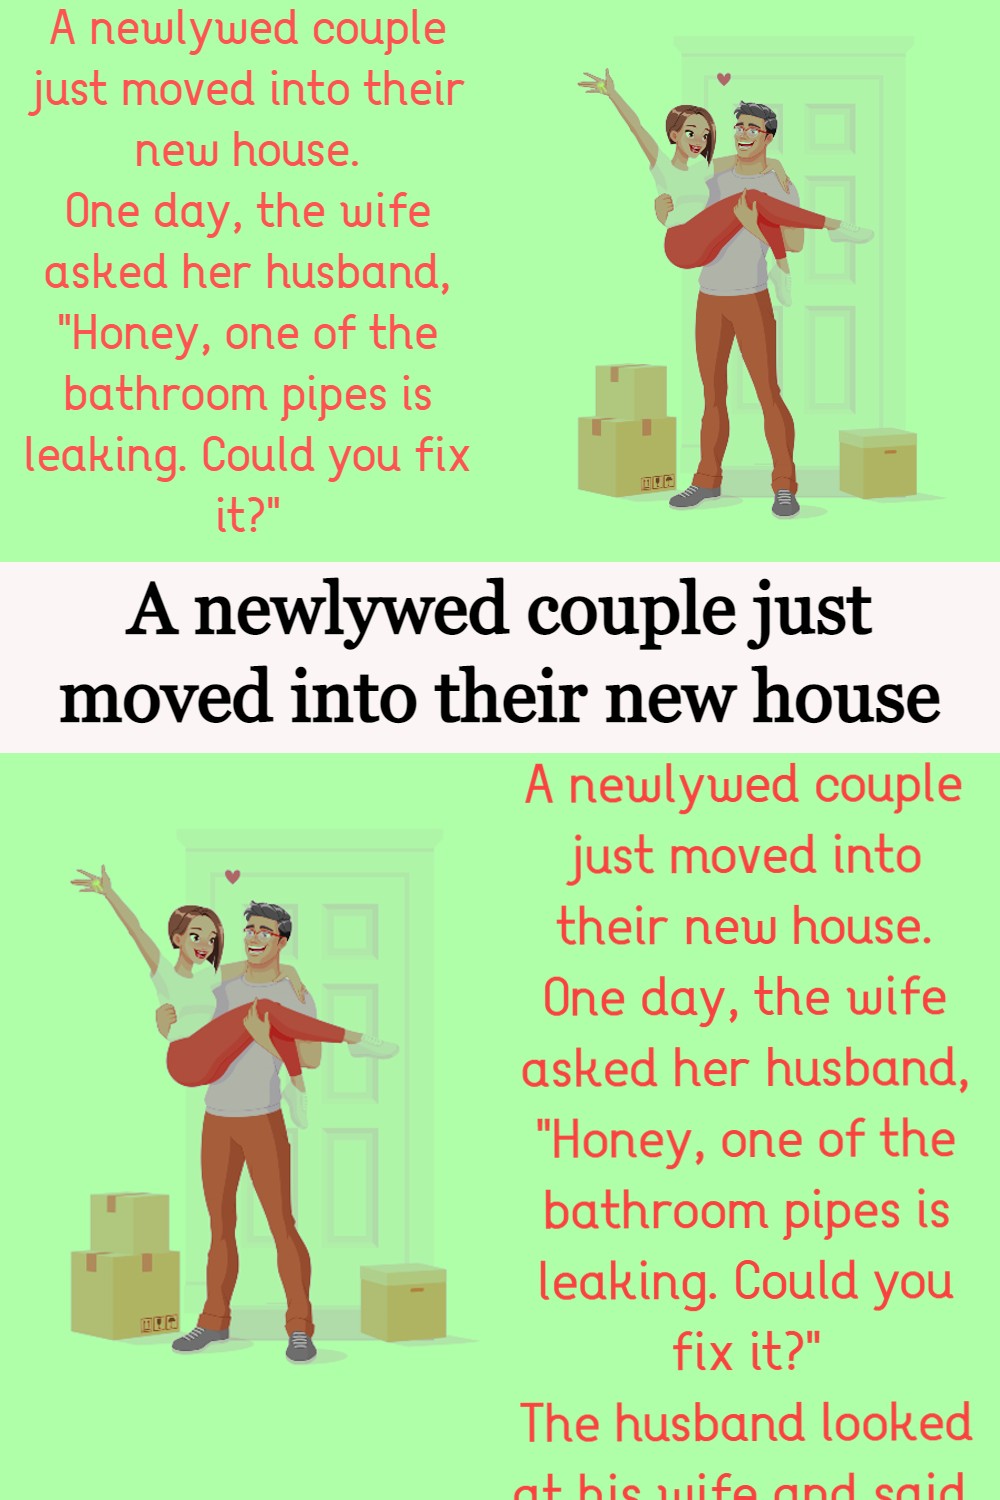 A newlywed couple just moved into their new house